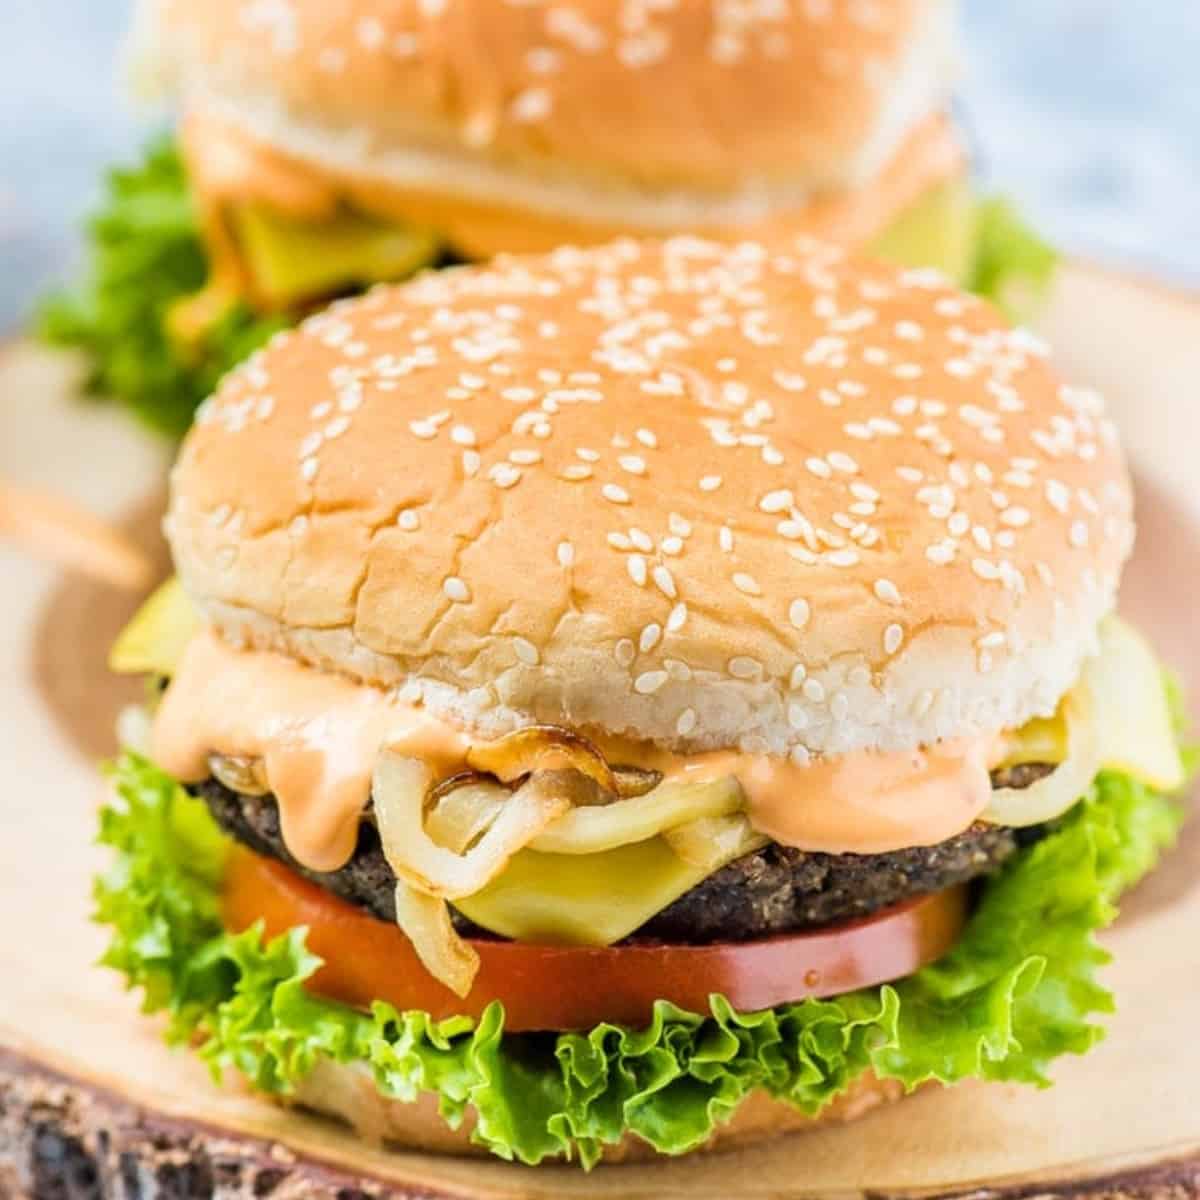 sesame seed buns with burger and toppings.